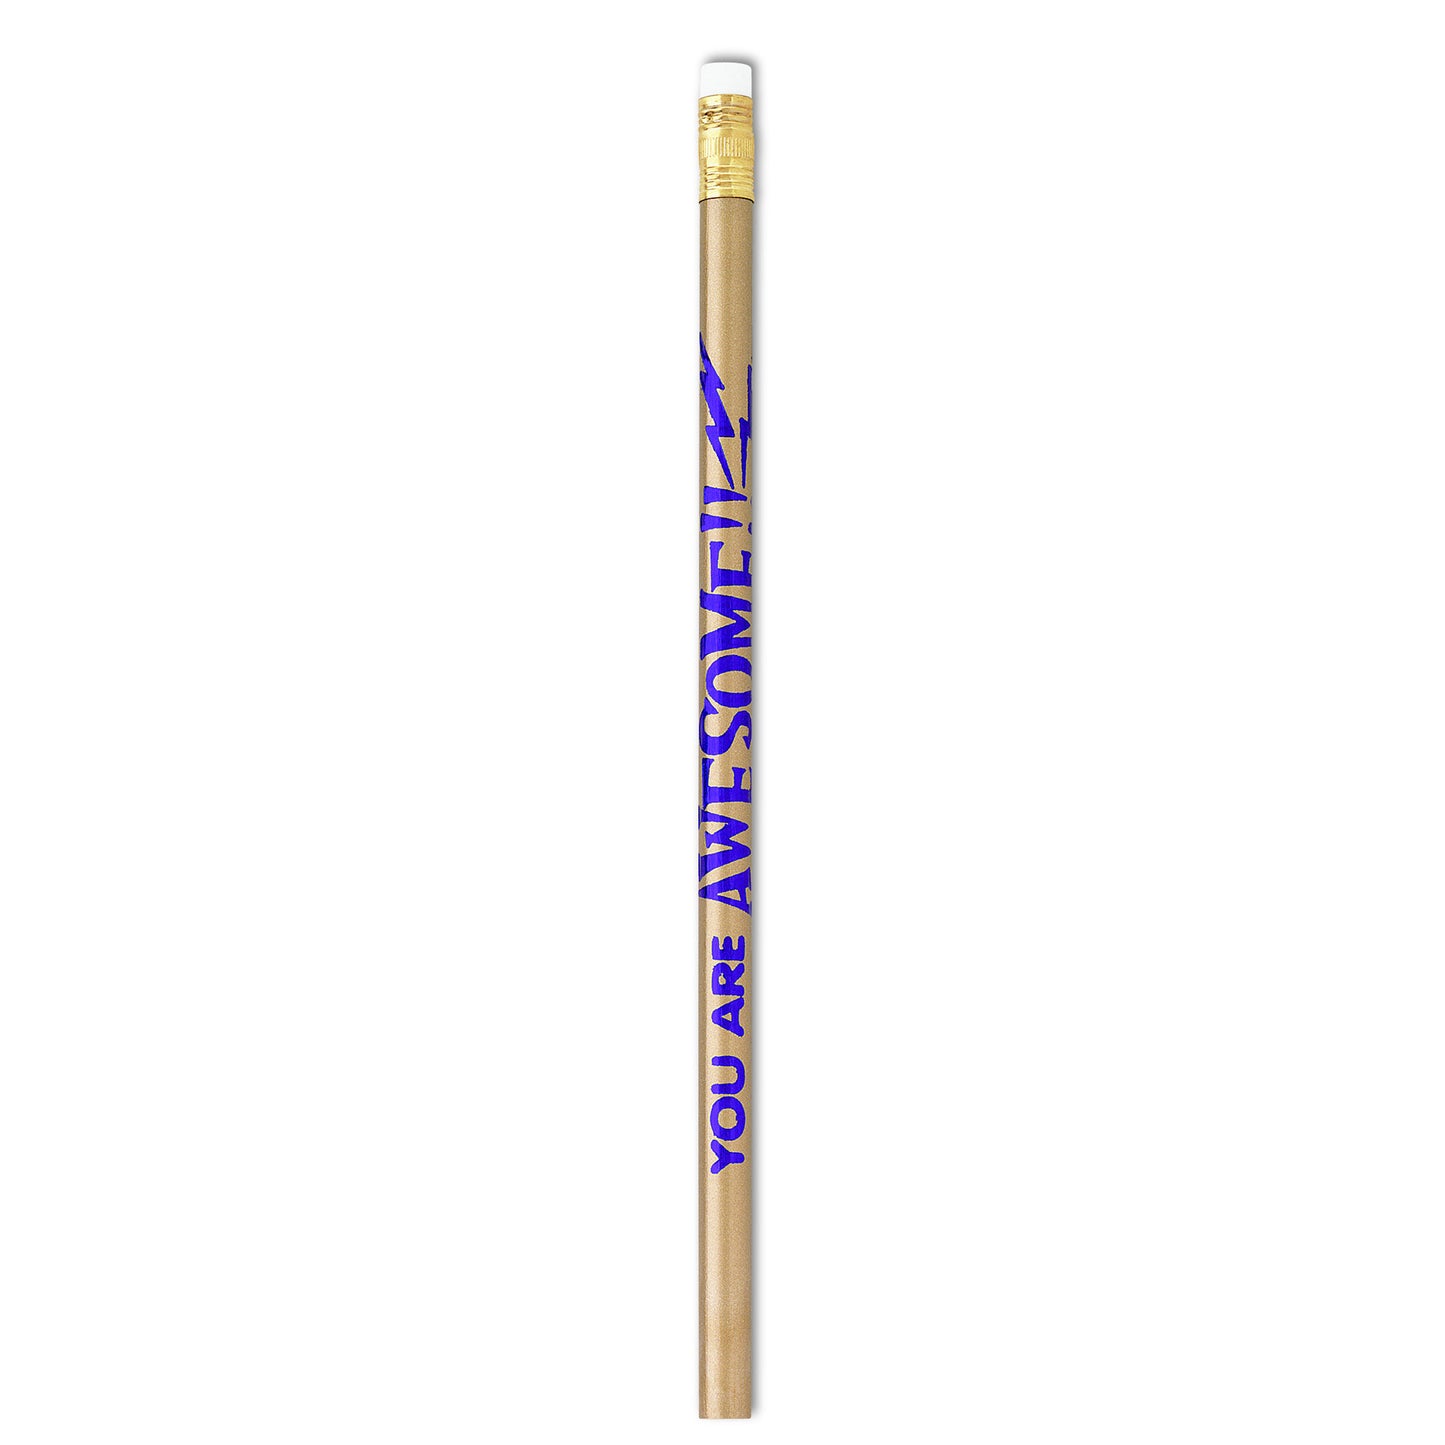 You Are Awesome! Pencil, Pack of 144